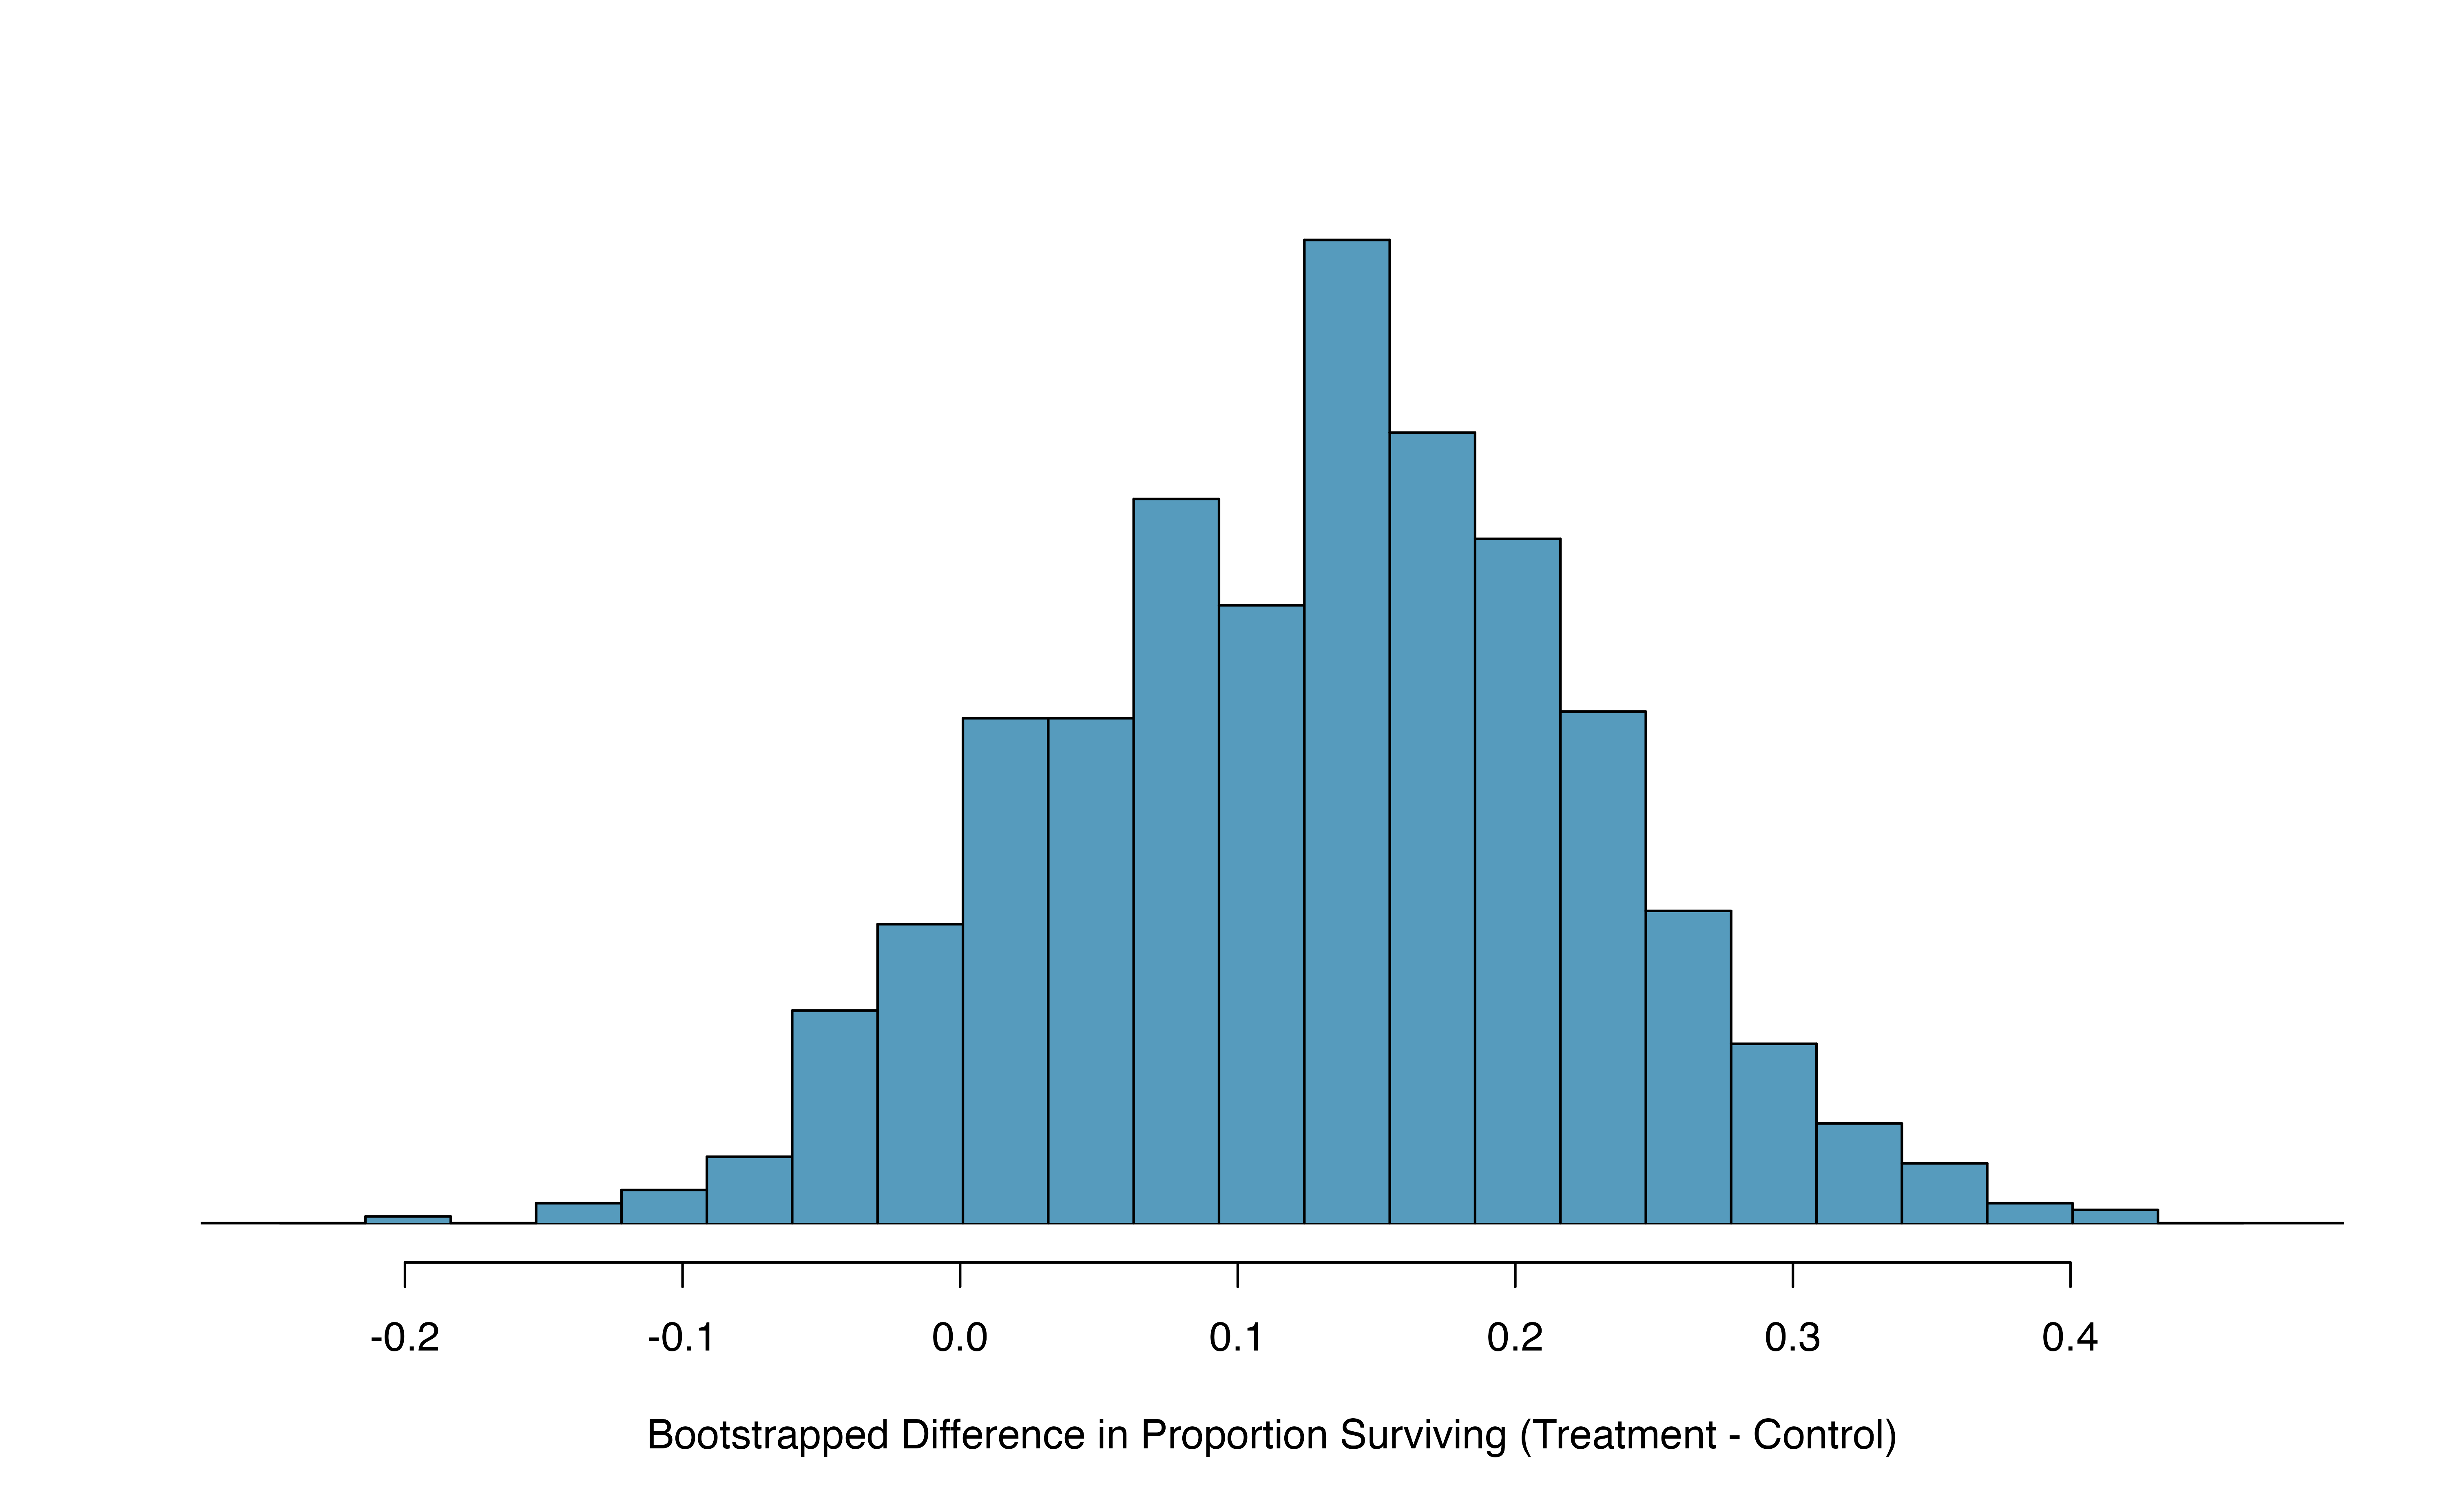 A histogram of differences in proportions (treatment $-$ control) from 1000 bootstrap simulations using the CPR data.